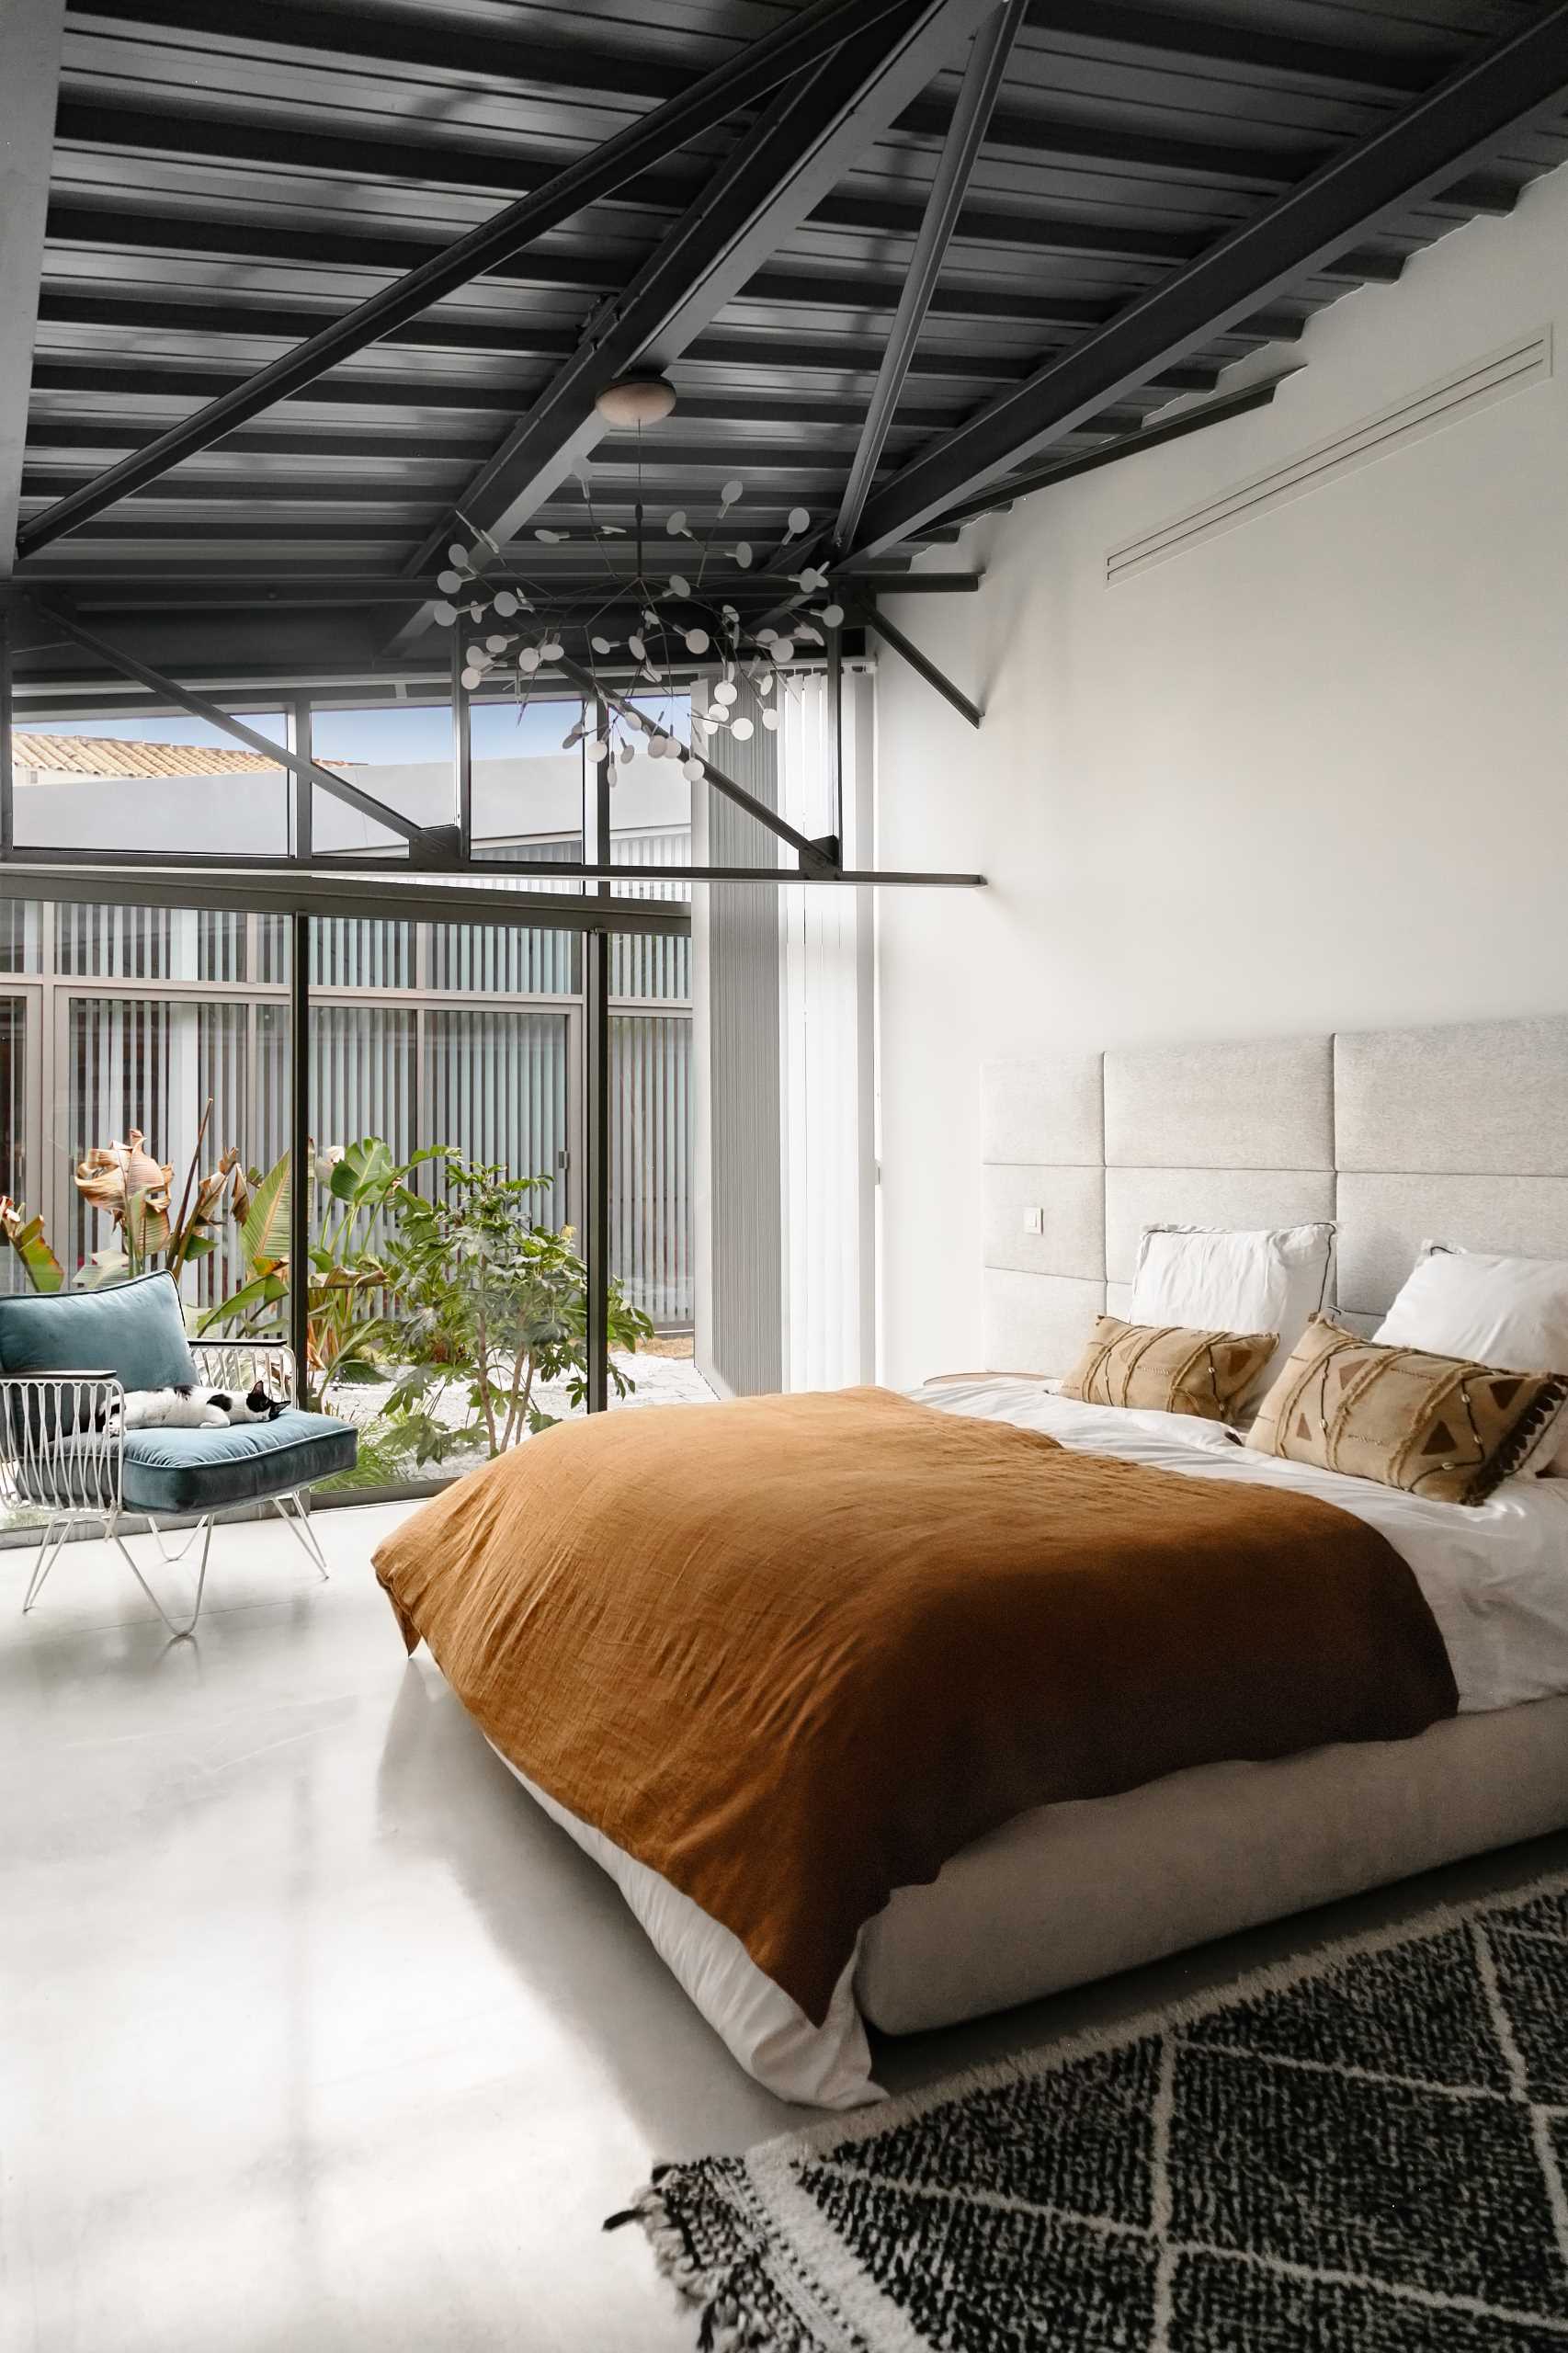 In this modern bedroom, the white walls contrast the black elements, while the windows provide a view of the plants outside.